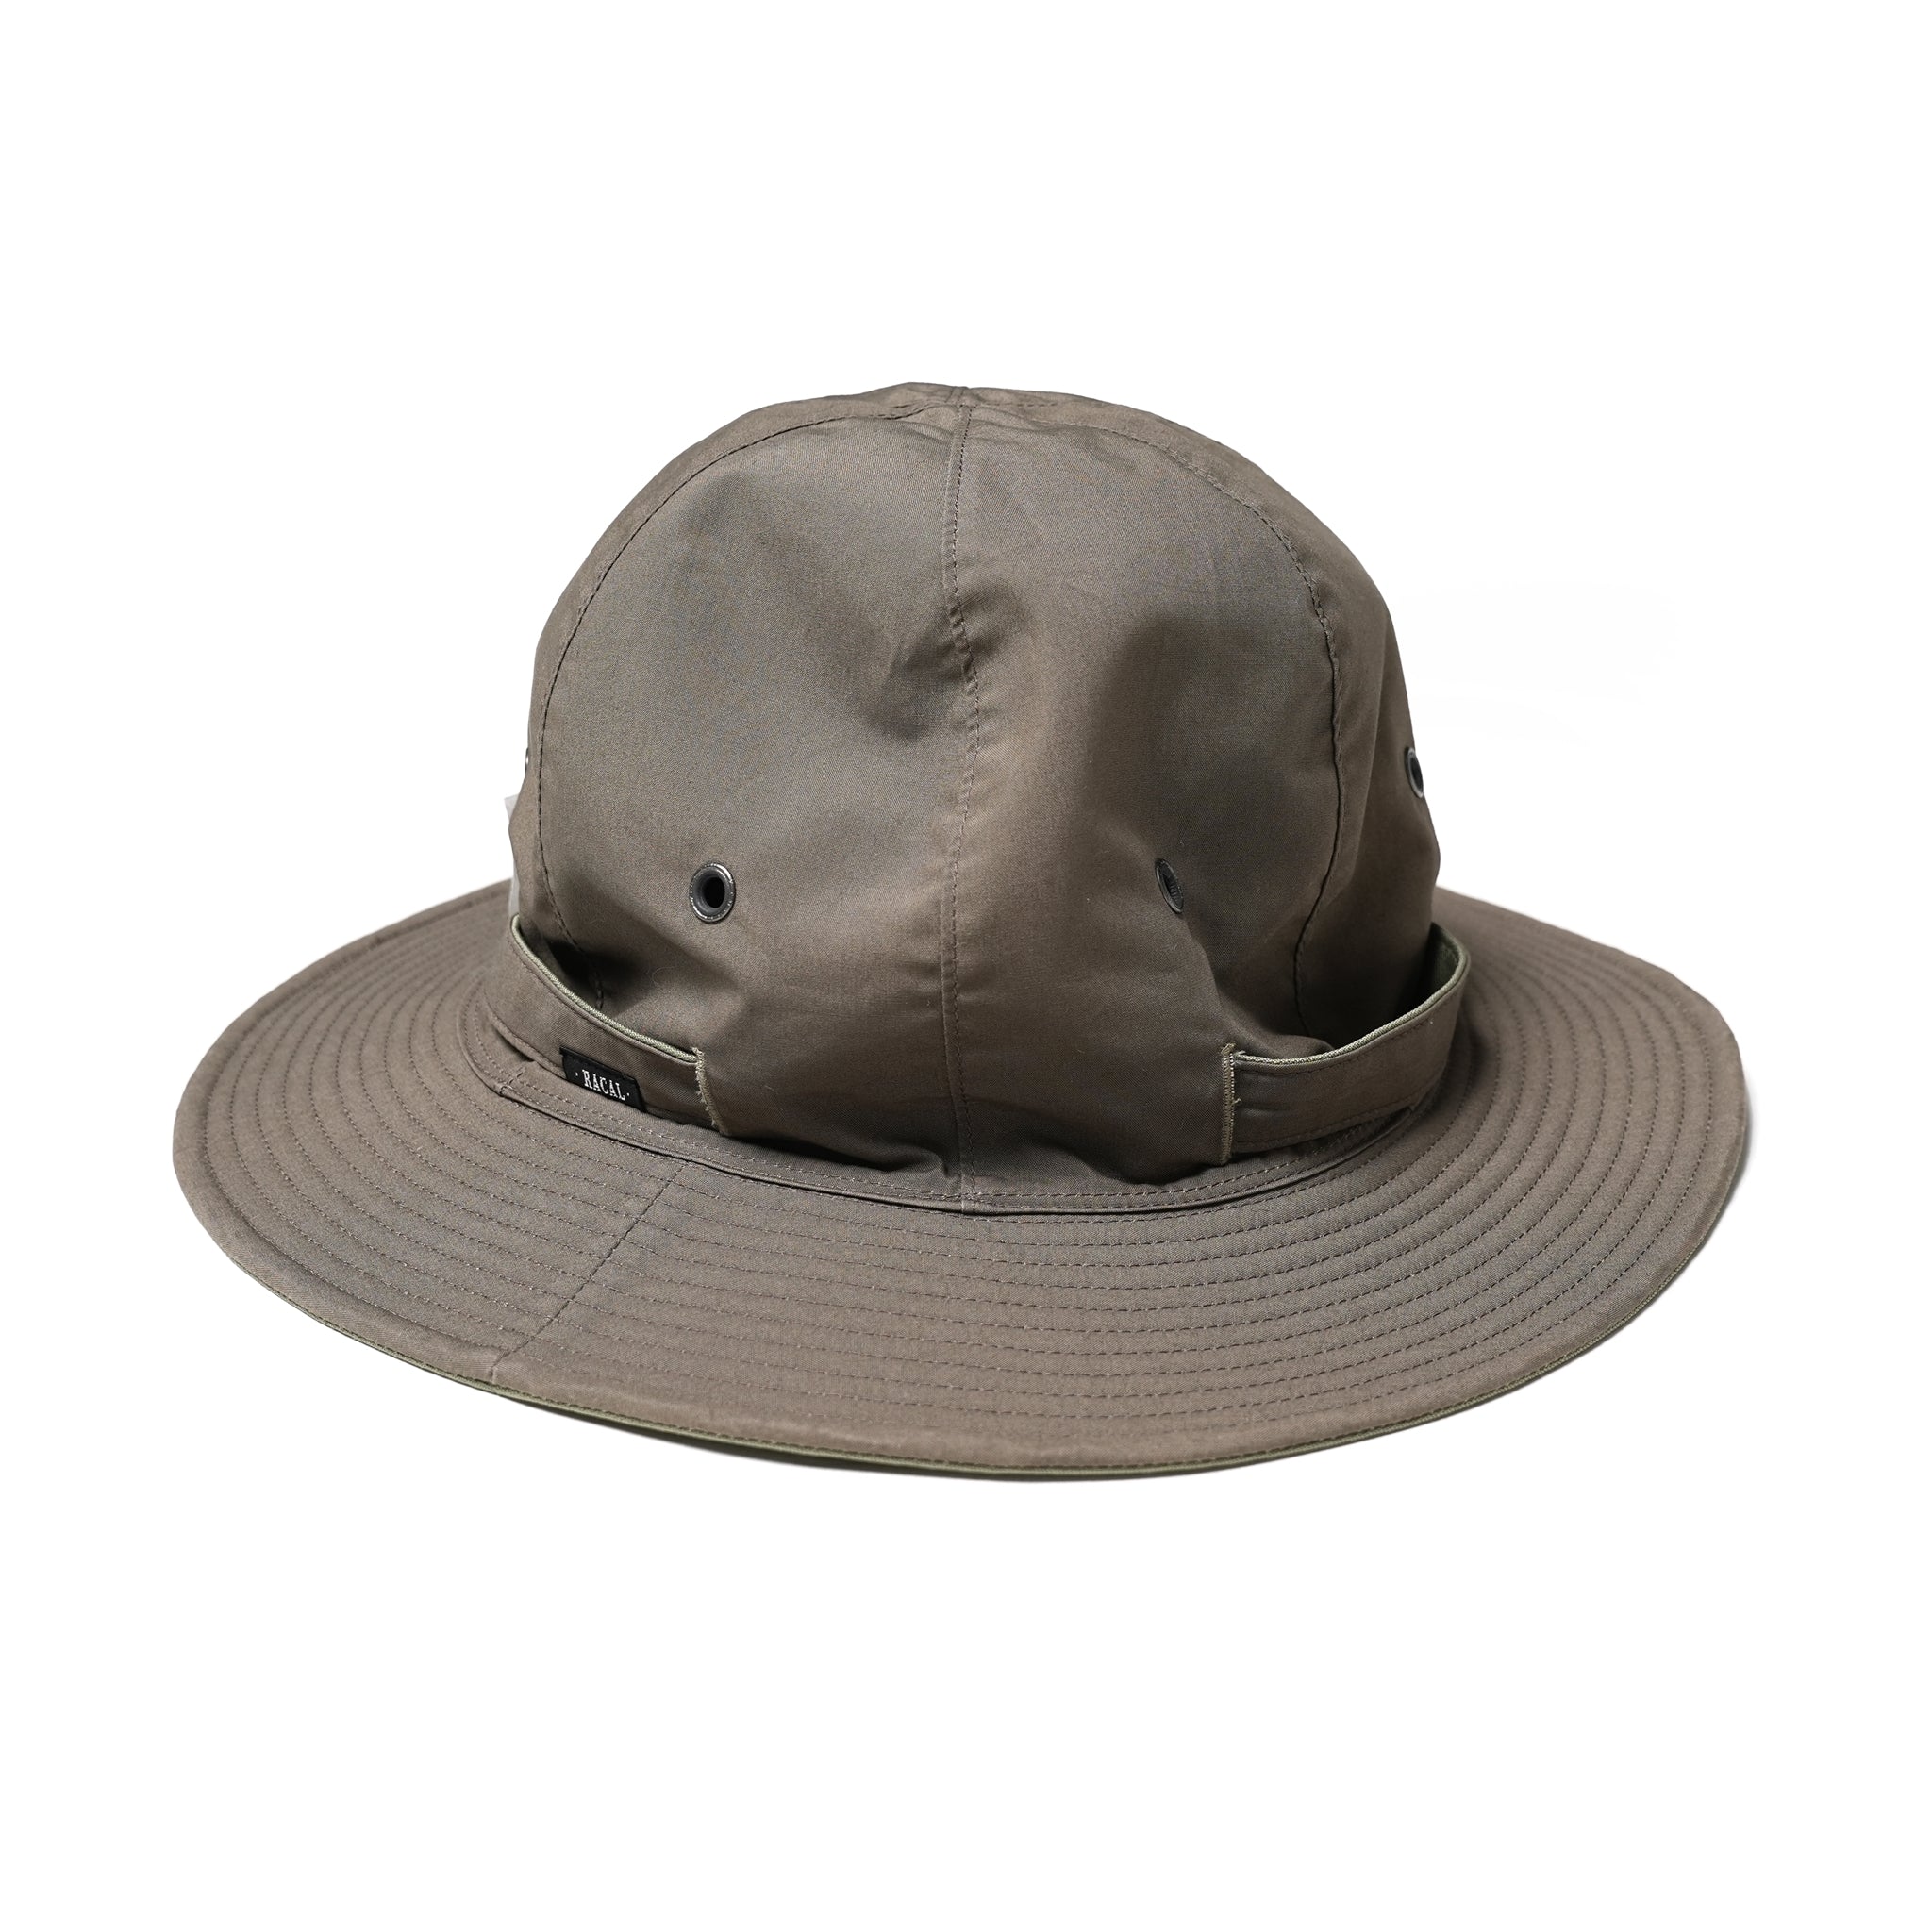 No:rl-21-1140 | Name:Reversible metro hat / リバーシブルメトロハット | Color:Olive【RACAL_ラカル】